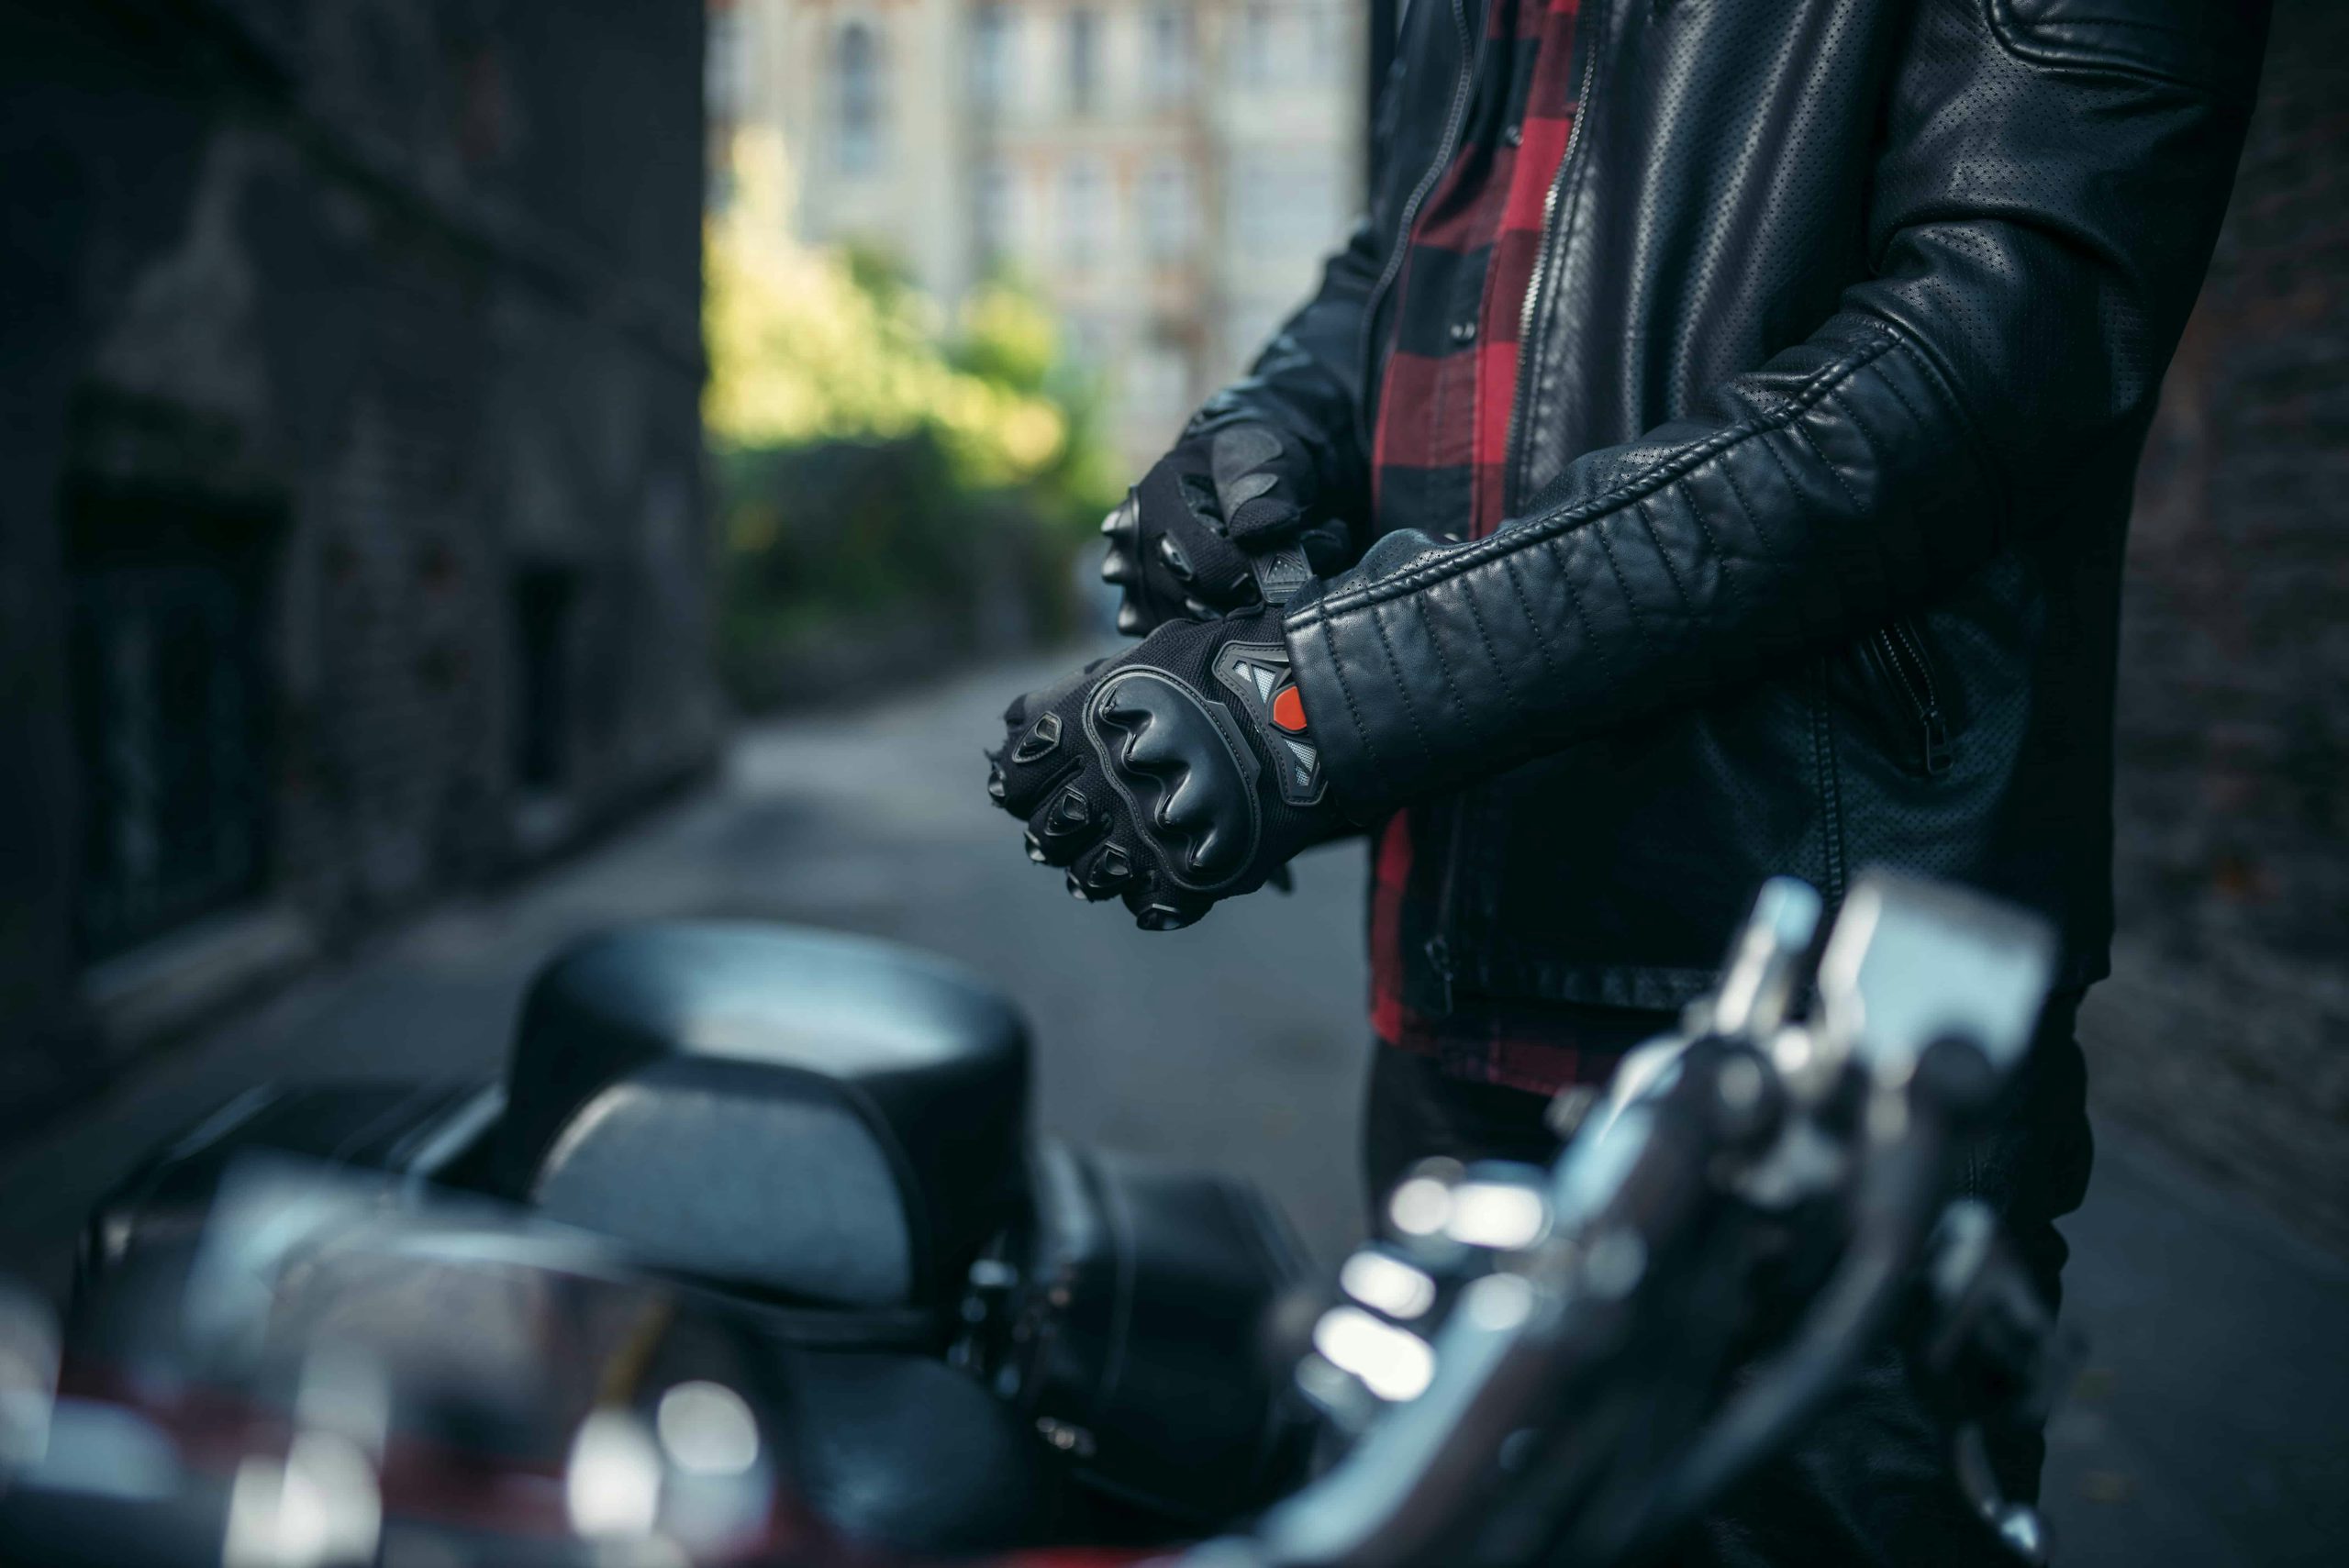 A motorcyclist wearing a leather jacket